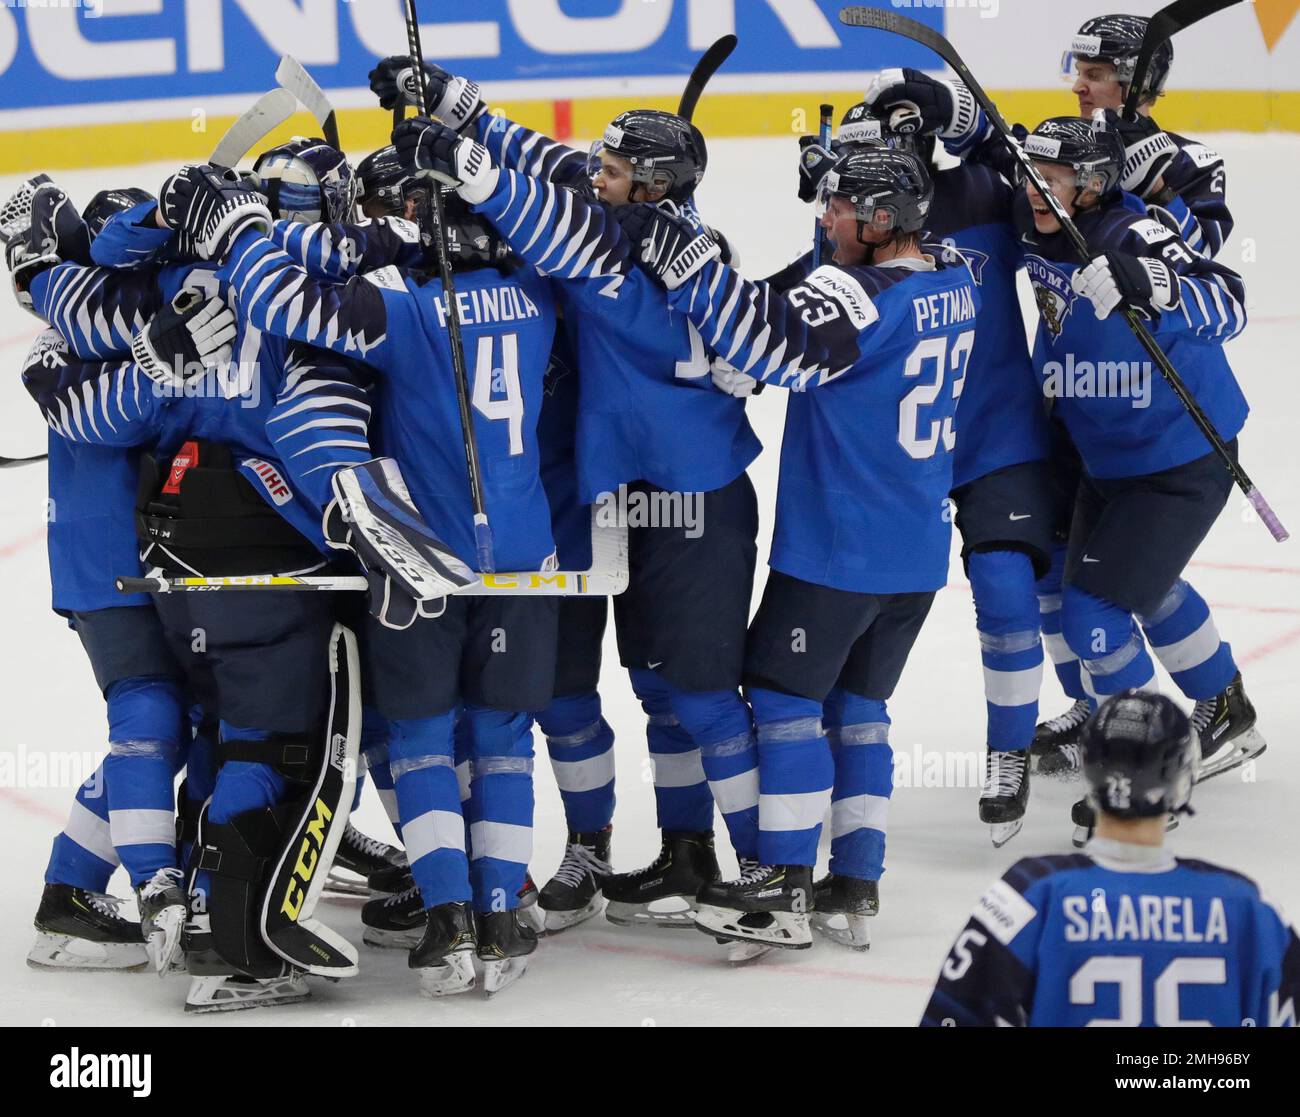 Players of Finland celebrate after winning the U20 Ice Hockey Worlds quarterfinal match between Finland and the United States in Trinec, Czech Republic, Thursday, Jan